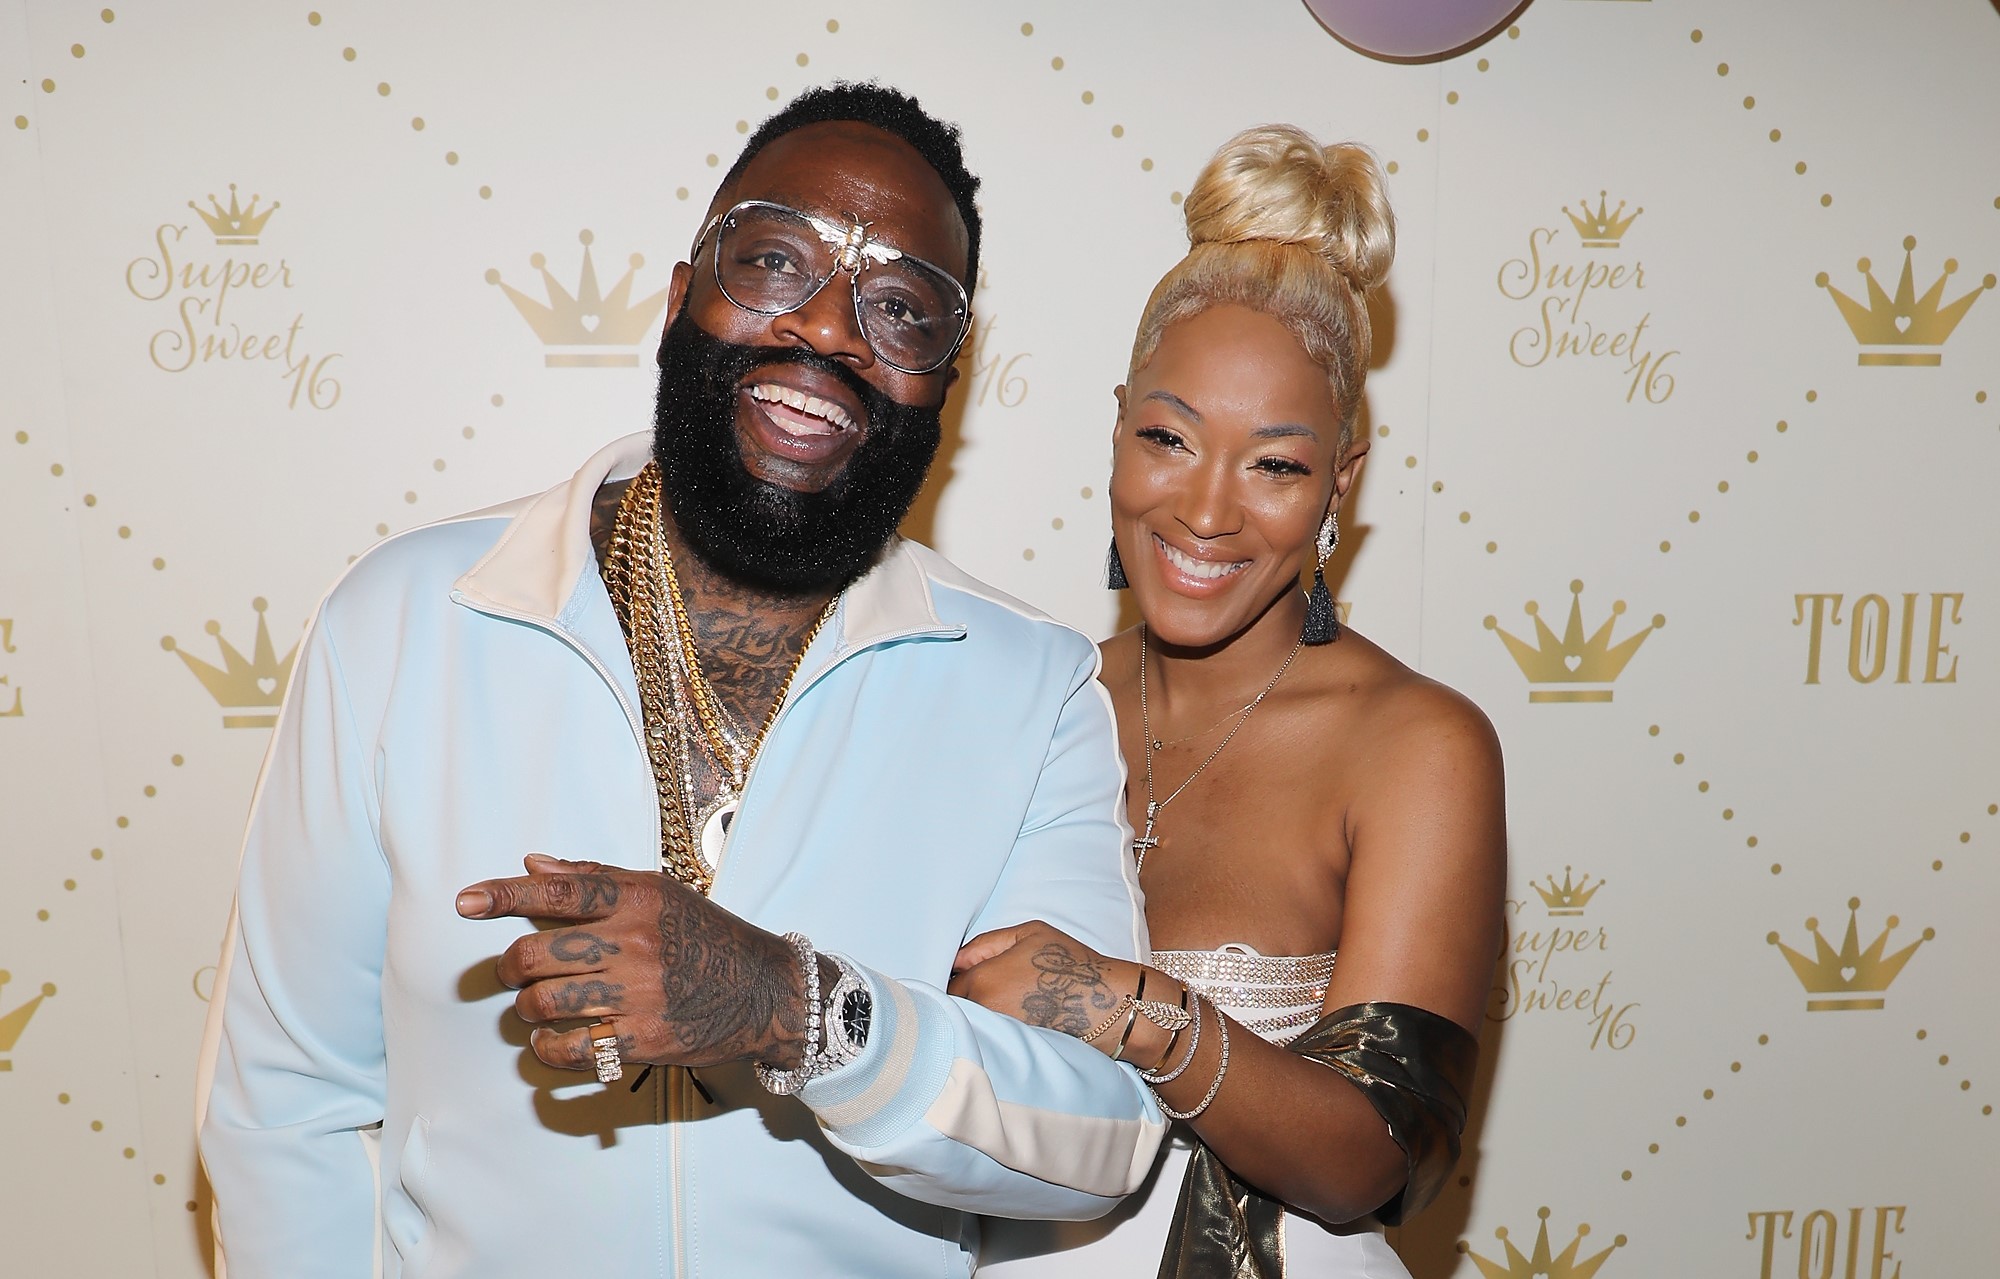 Rick Ross and Briana Camille attend Toie's Royal Court: Super Sweet 16 at Versace Mansion, on April 7, 2018, in Miami, Florida. | Source: Getty Images